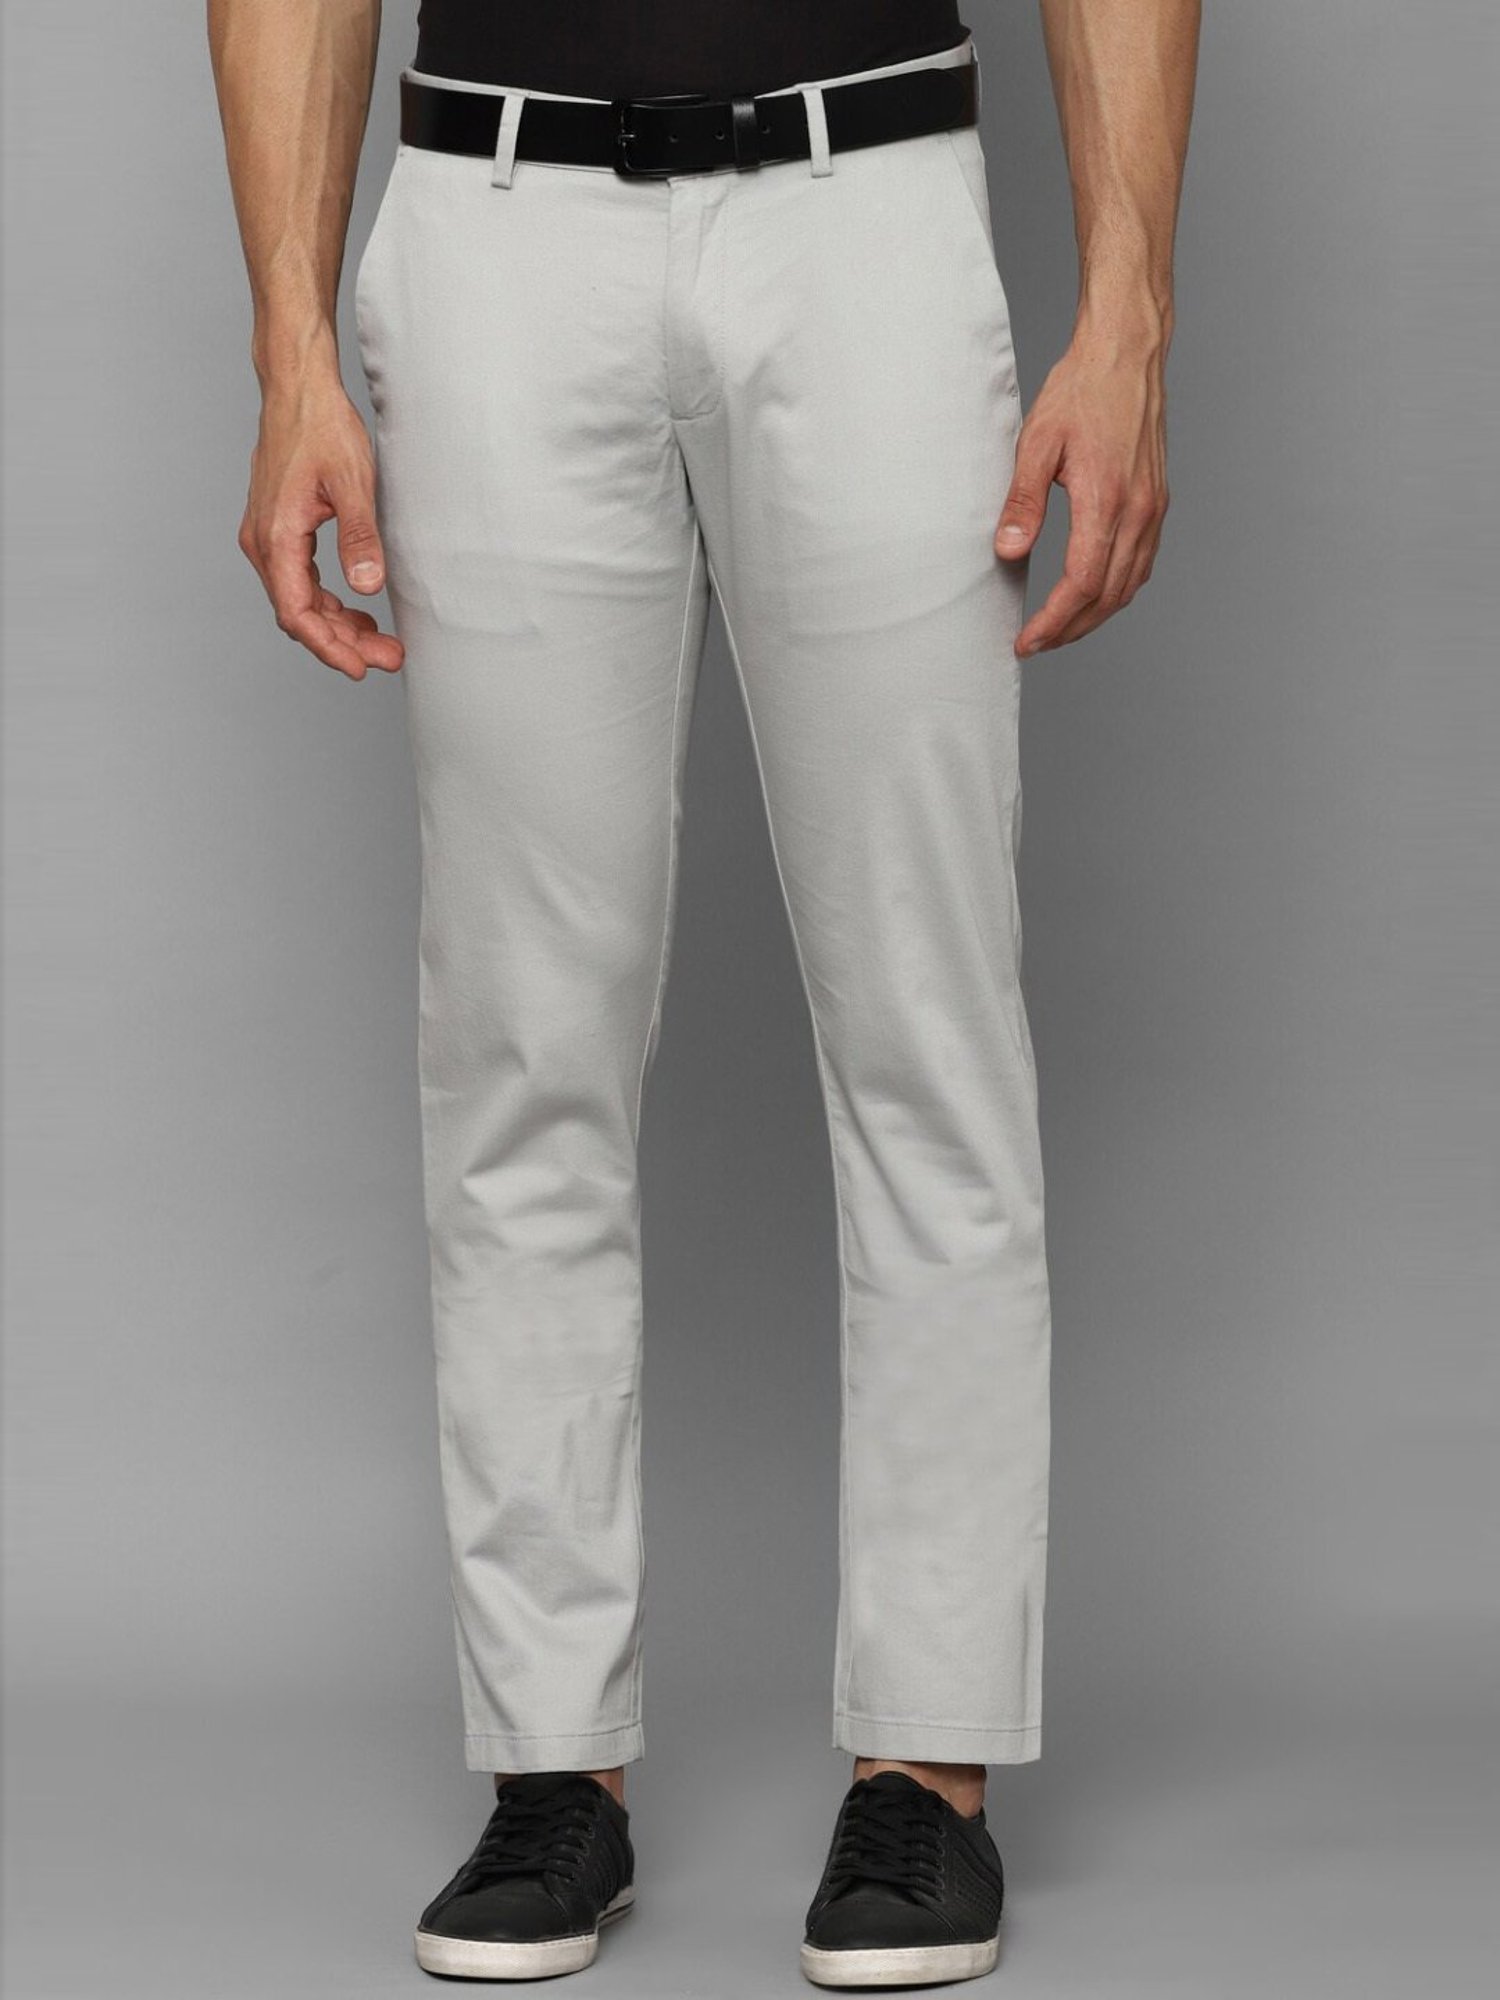 Buy Grey Polyester Viscose Formal Trousers online  Looksgudin